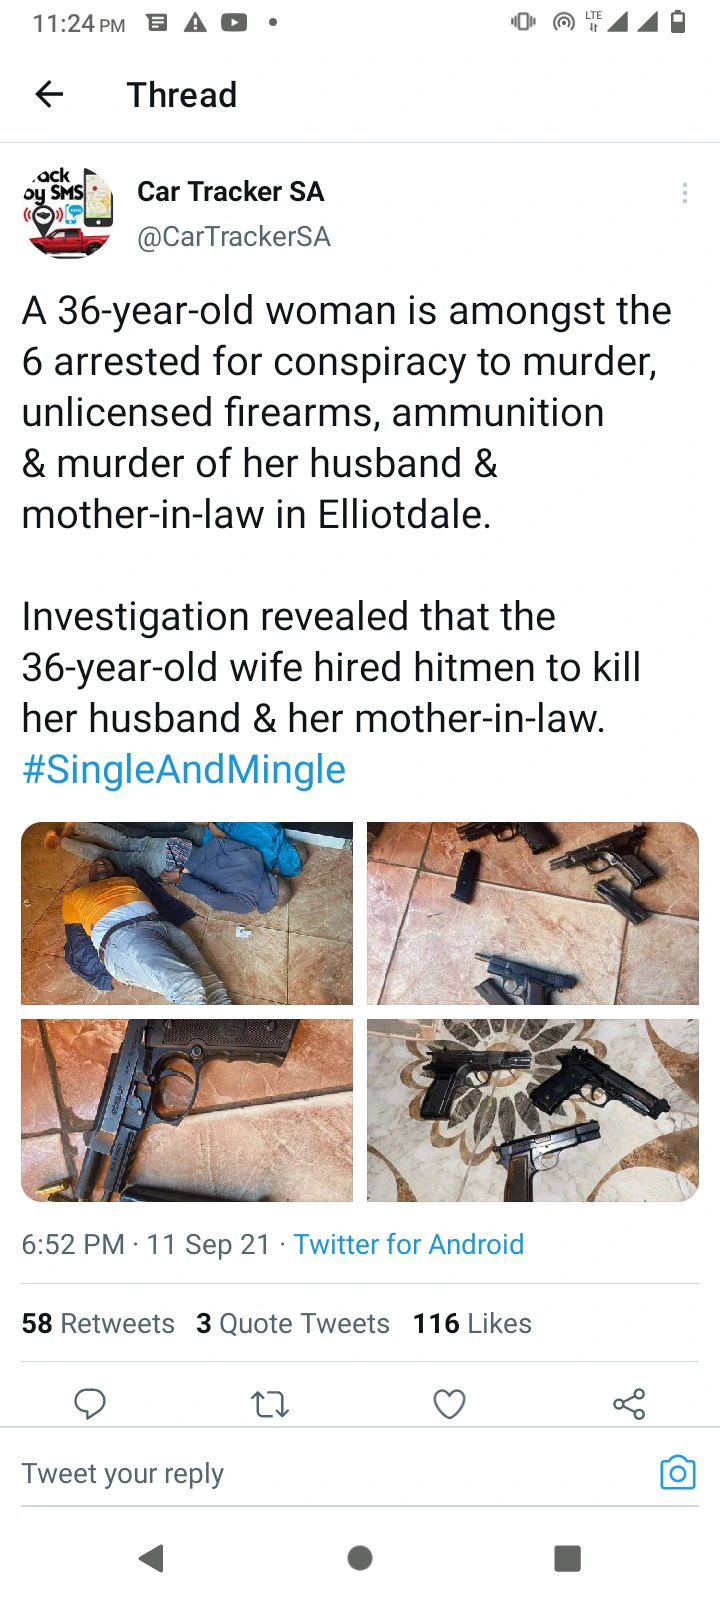 Sadness! A woman hired a hitman to kill her husband and mother-in-law 3